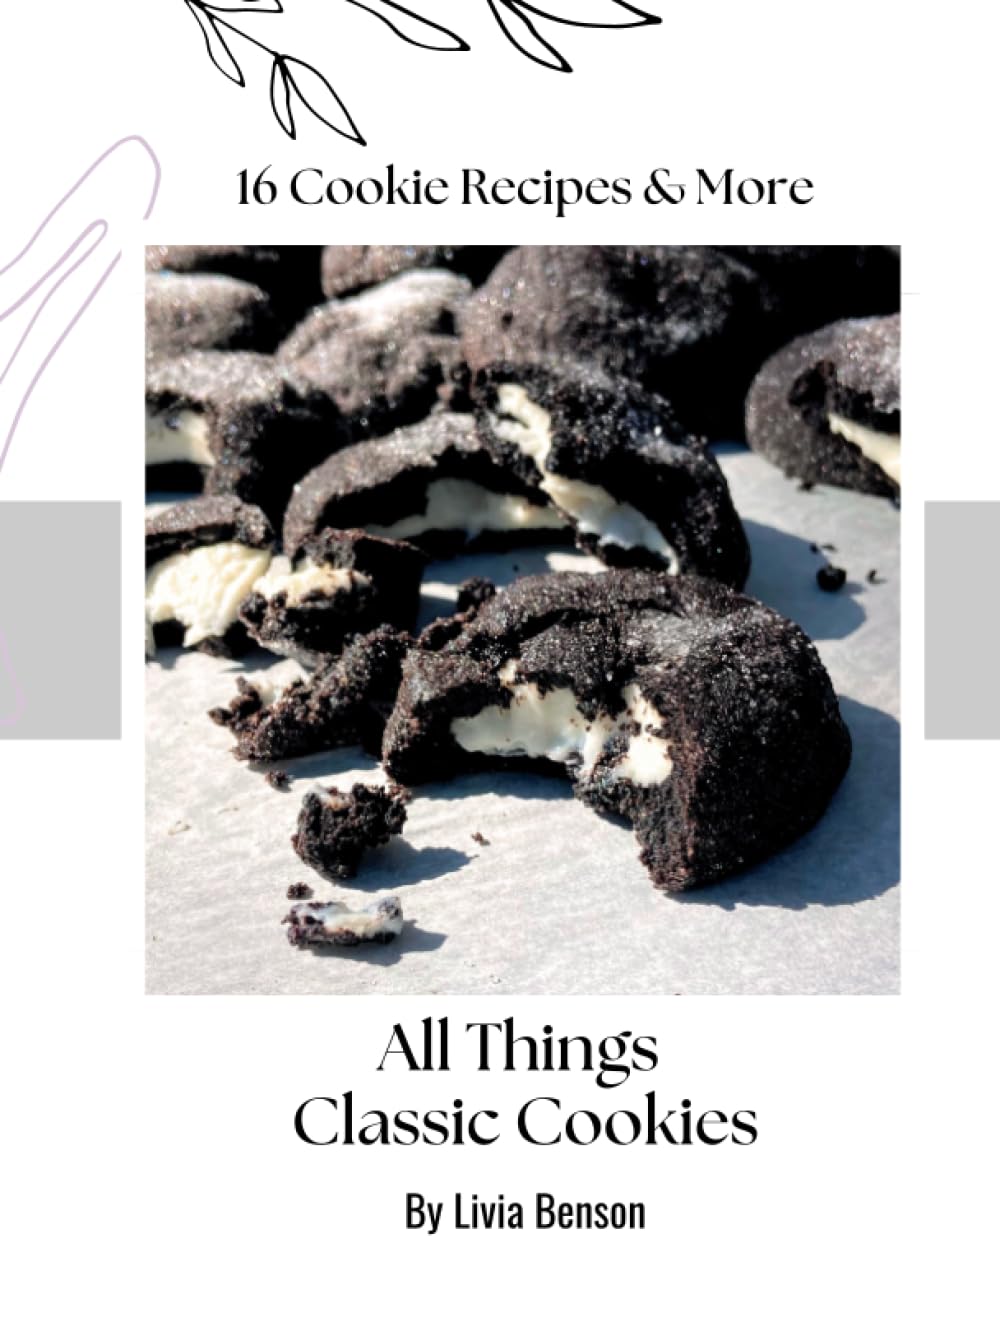 All Things Classic Cookies | 16 Cookie Recipes & More